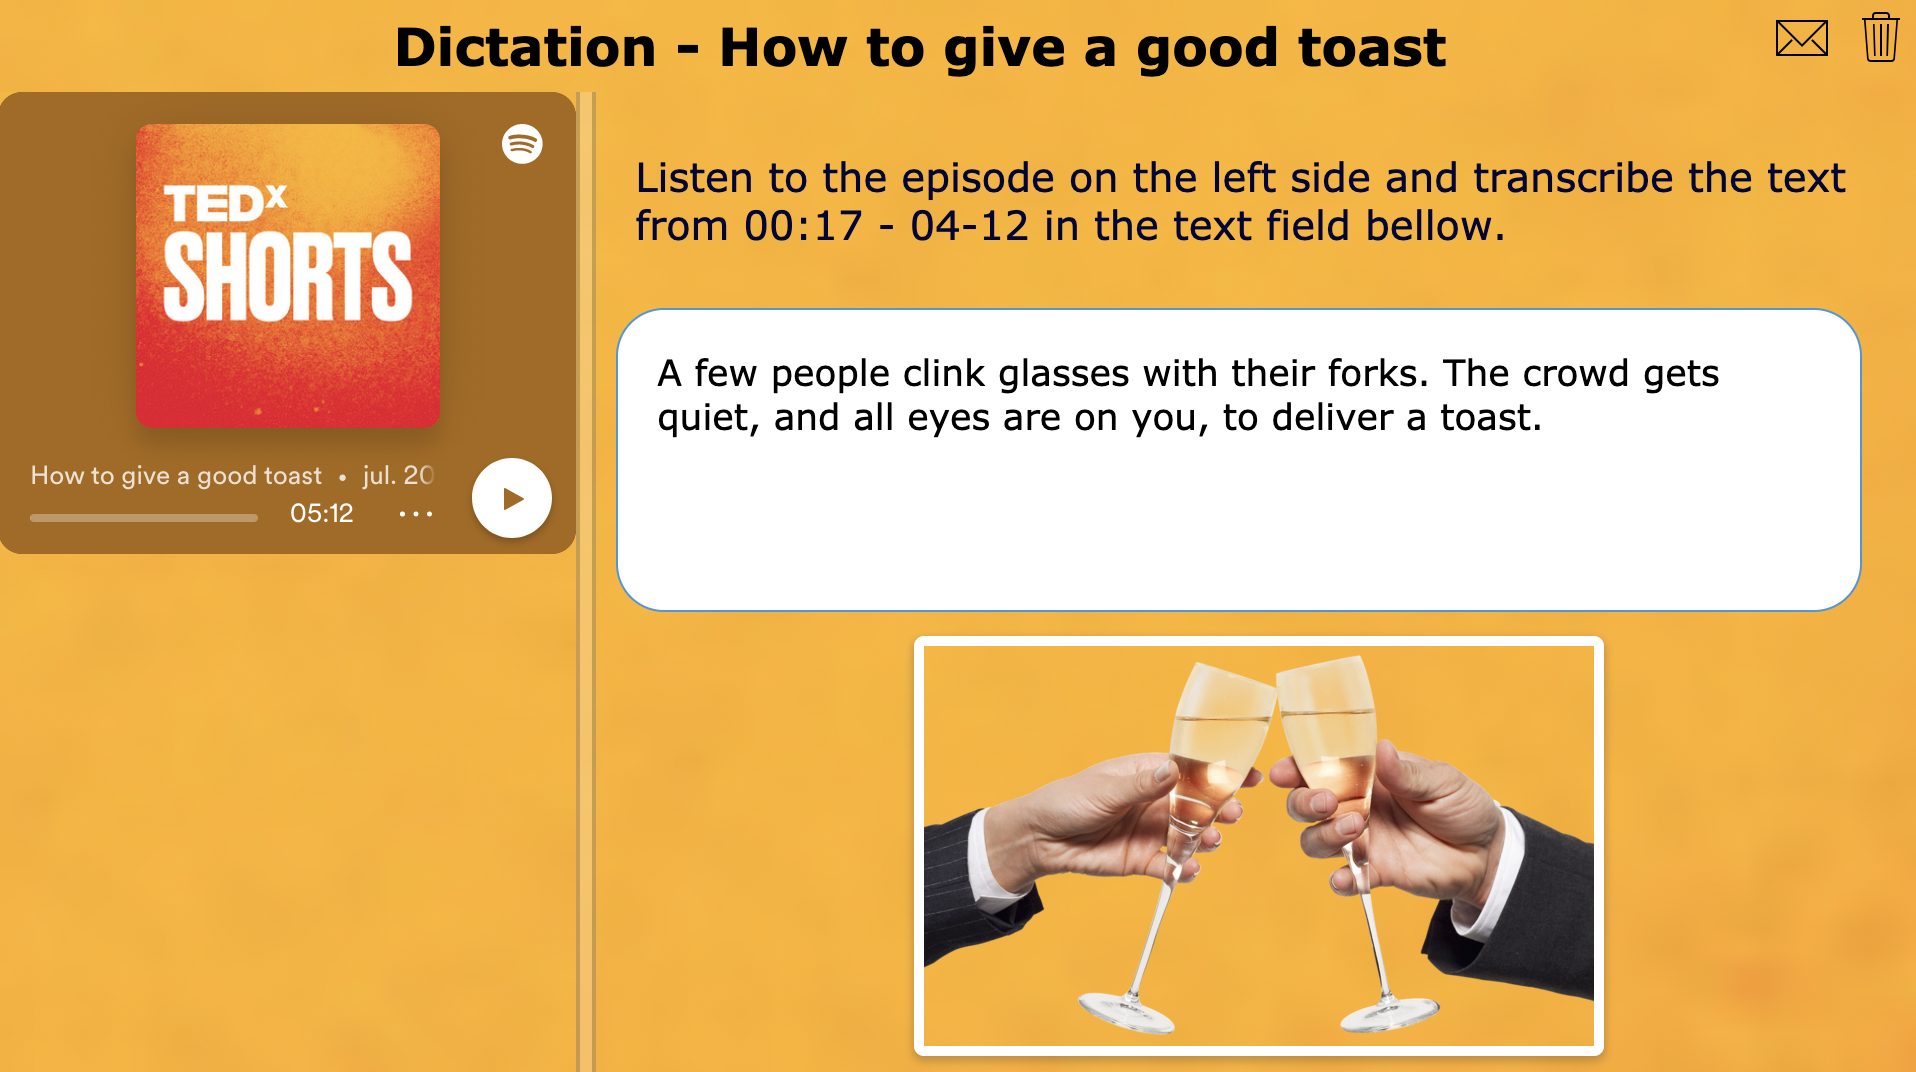 podcast dictation activity - Ted Talk - How to give a good toast